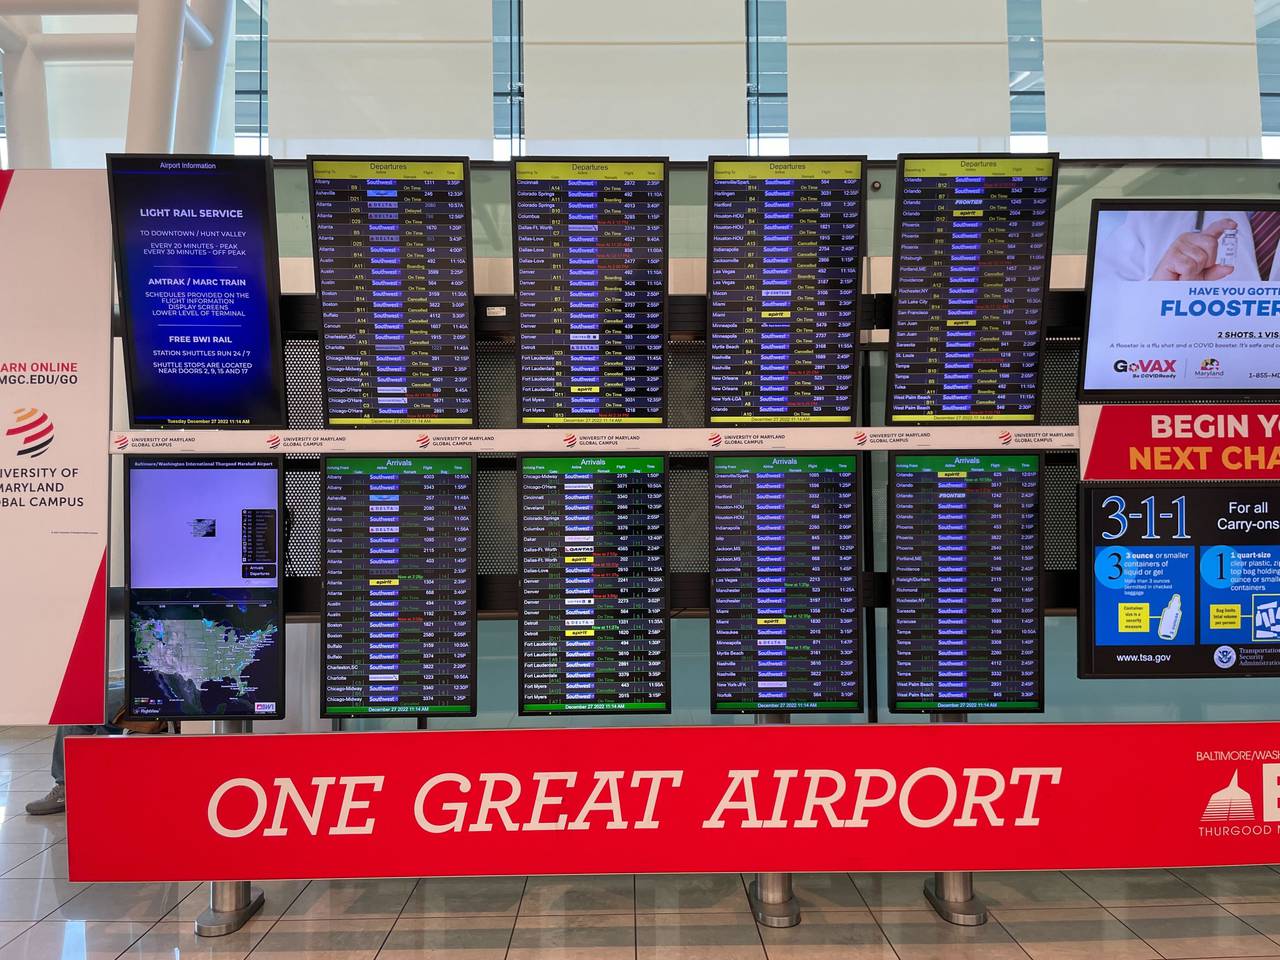 Flight cancellations appeared across the Baltimore/ Washington International Thurgood Marshall Airport's information screens Tuesday.